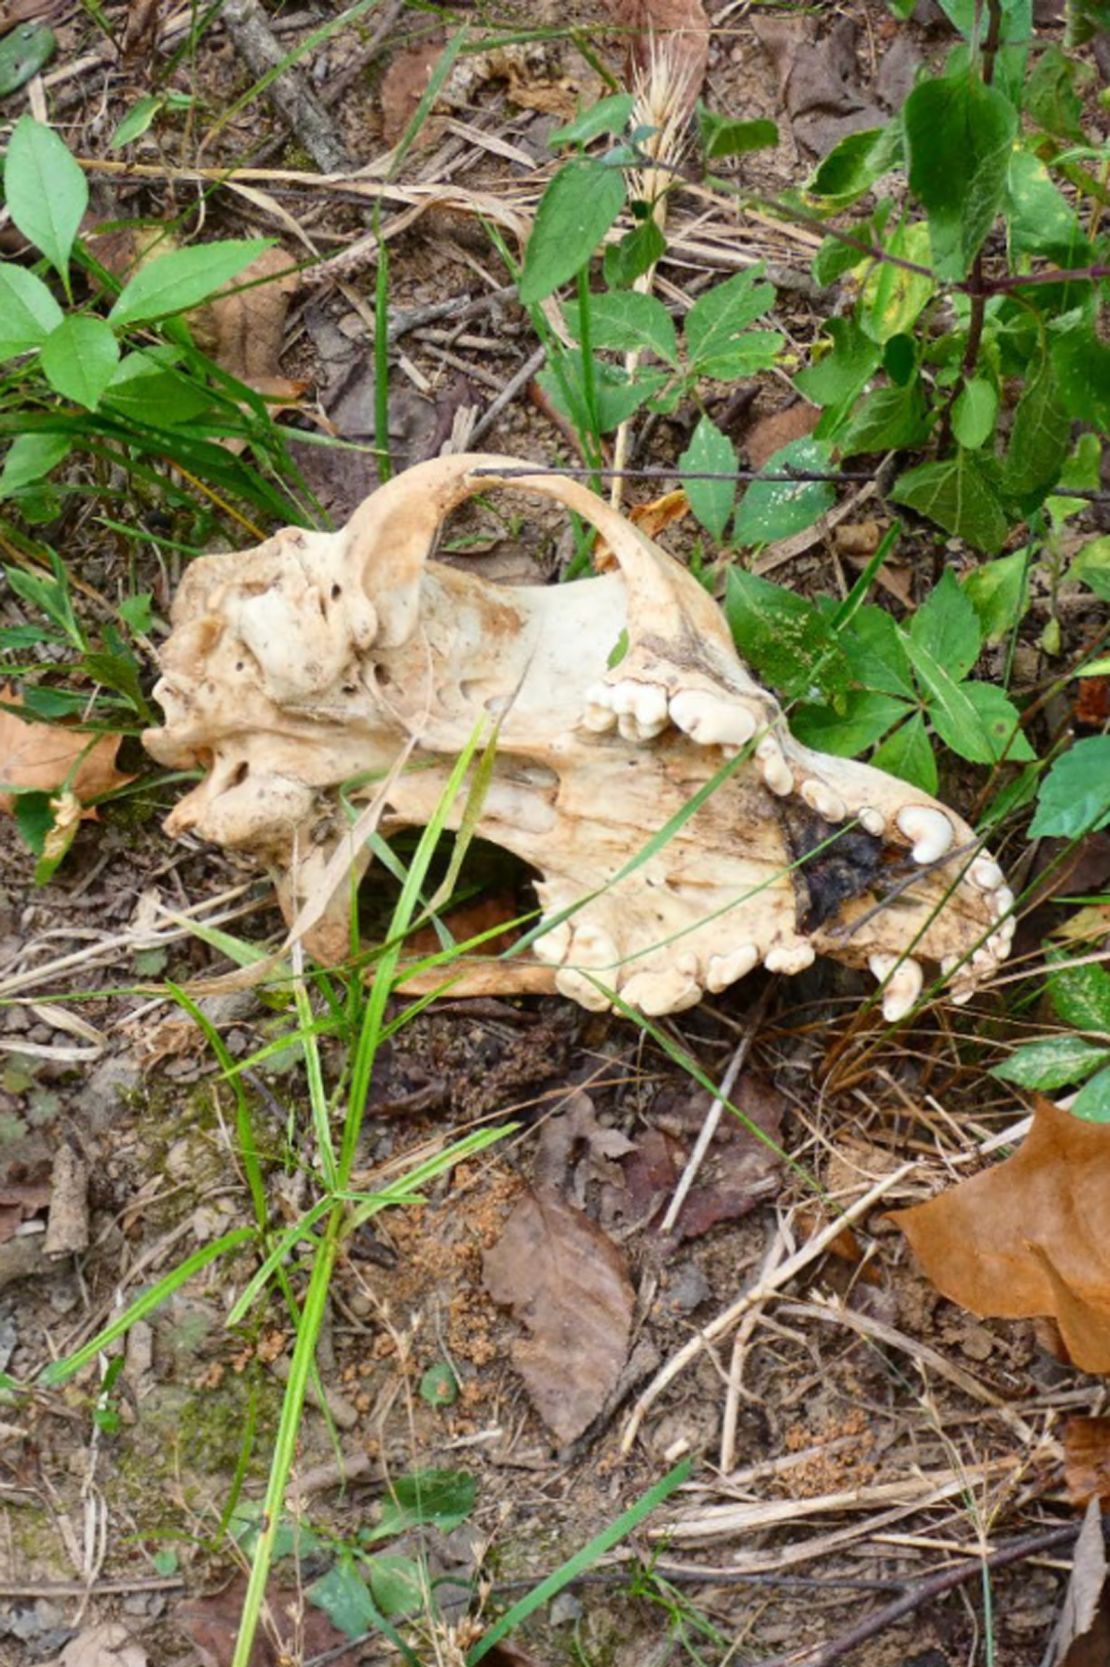 Animal remains were discovered on a suspected dog fighter's property in 2022.